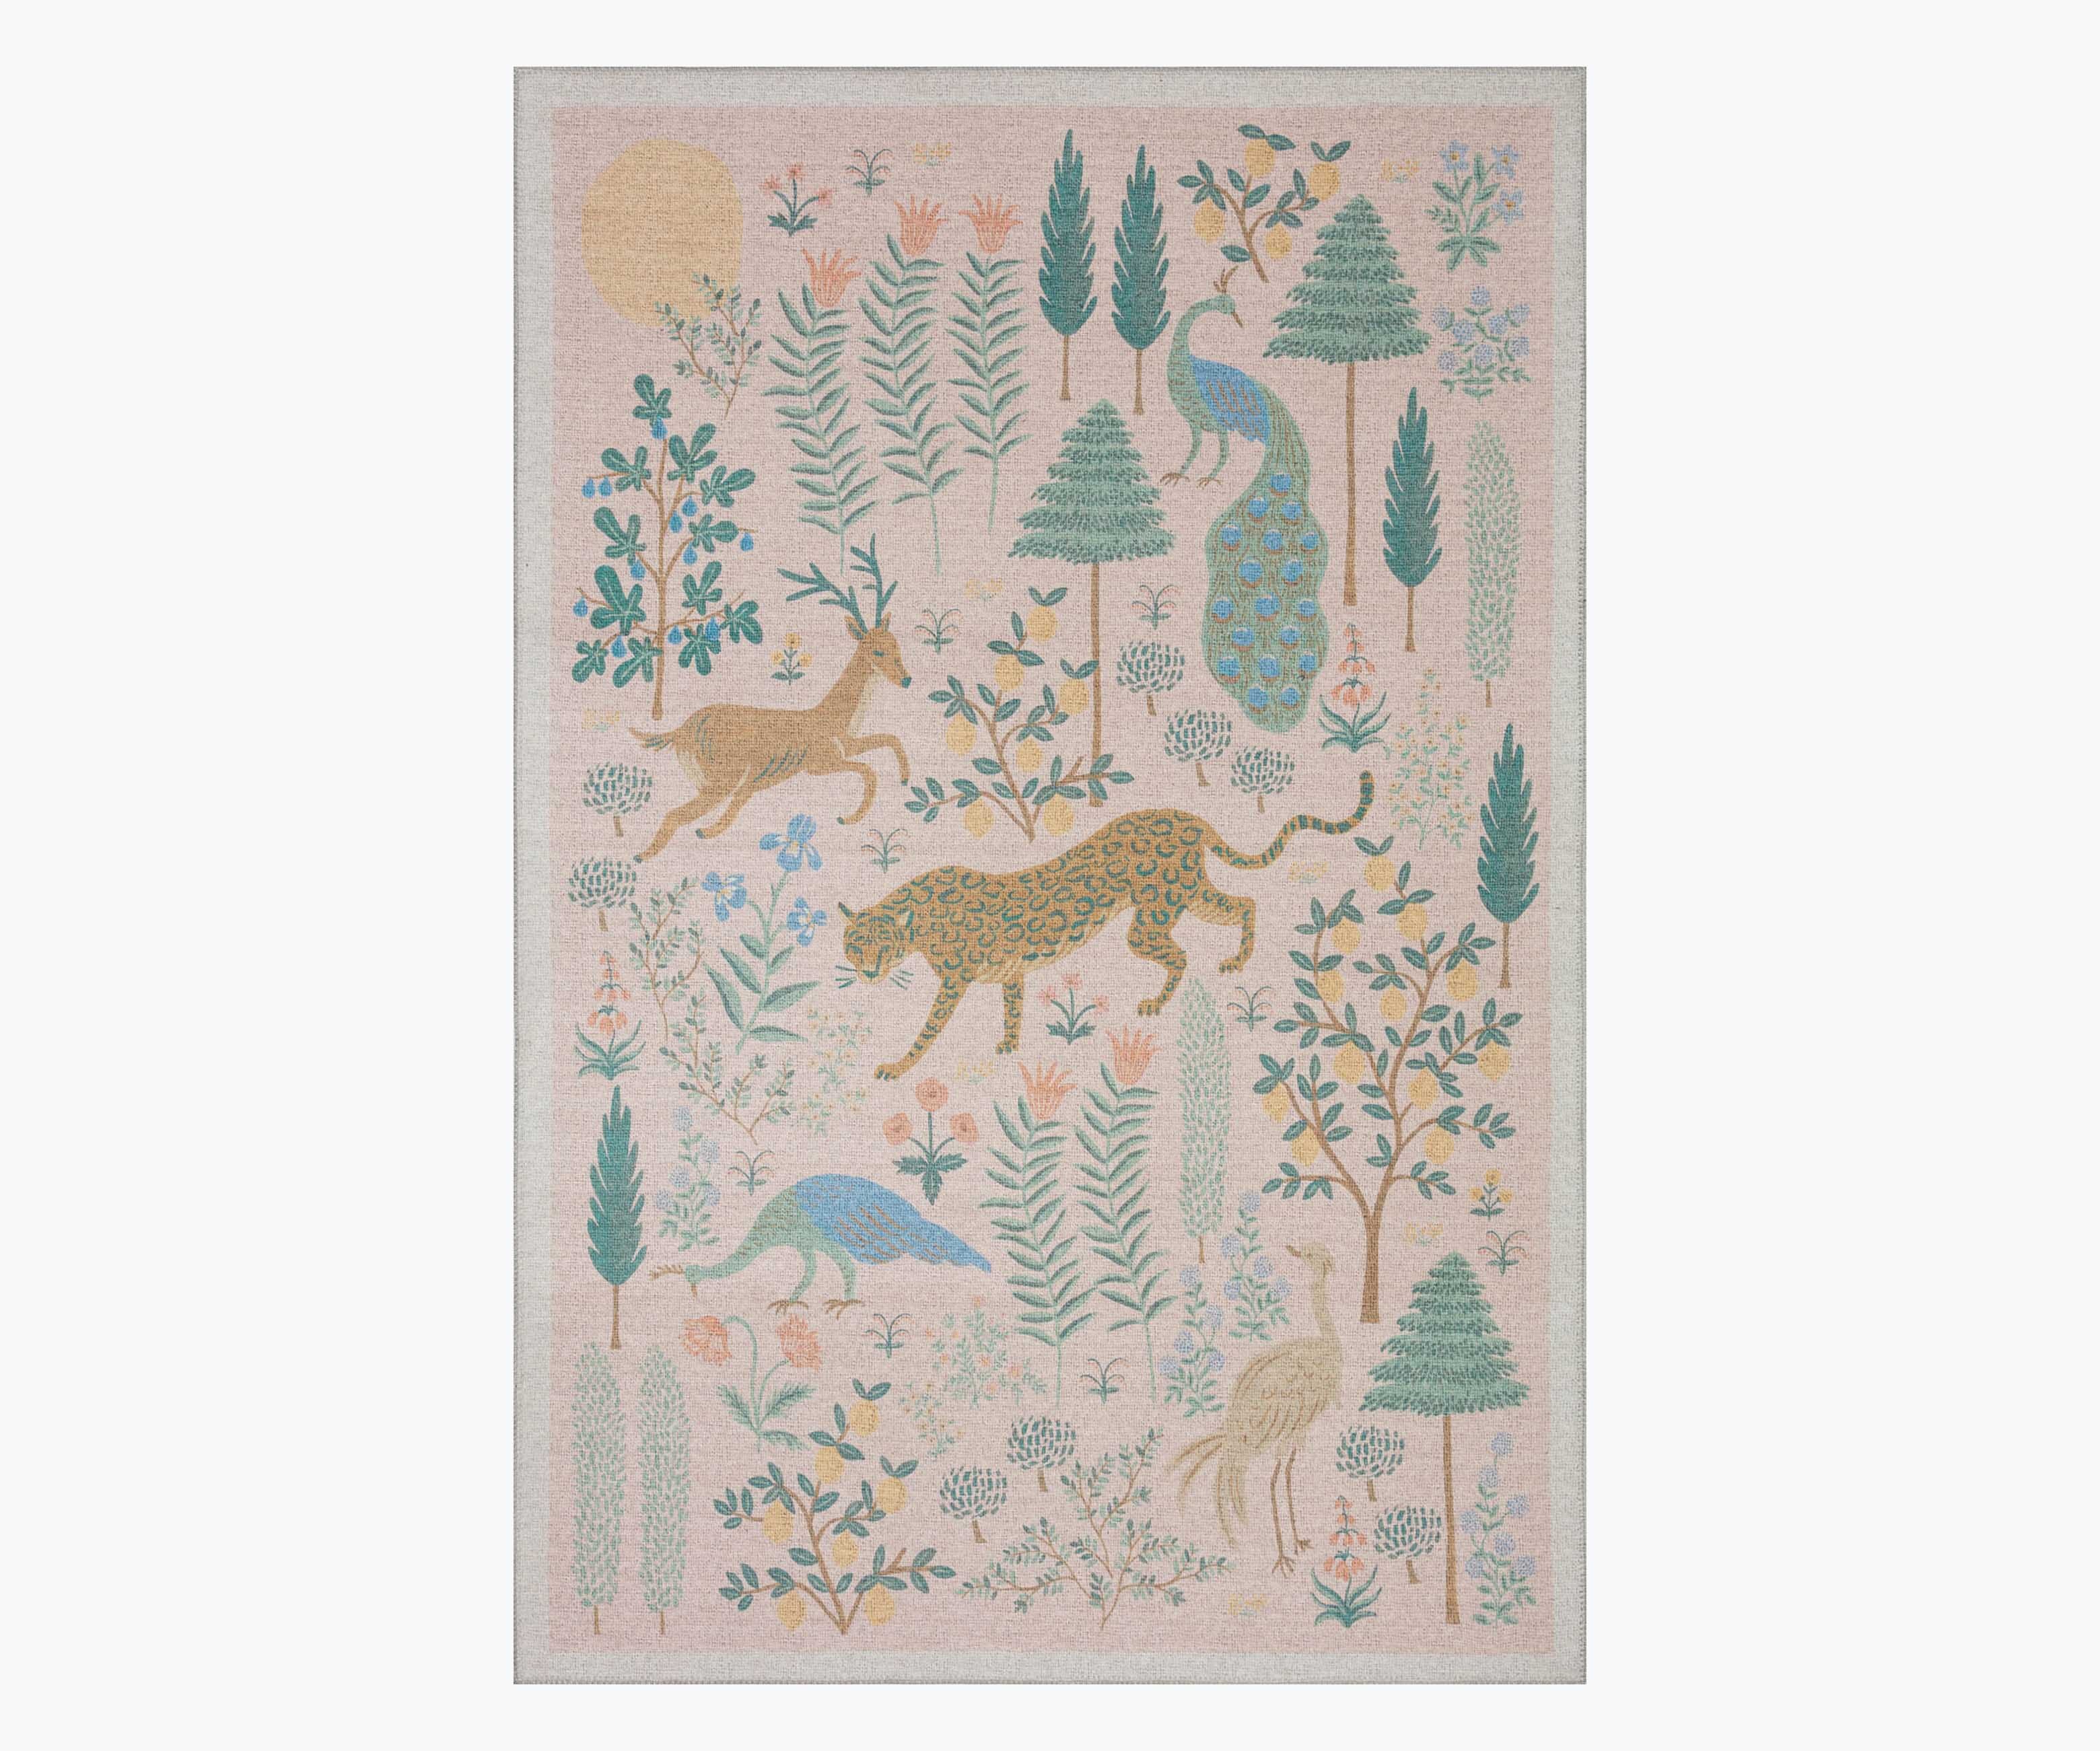 Printed Rugs - Rugs - Home Decor | Rifle Paper Co.